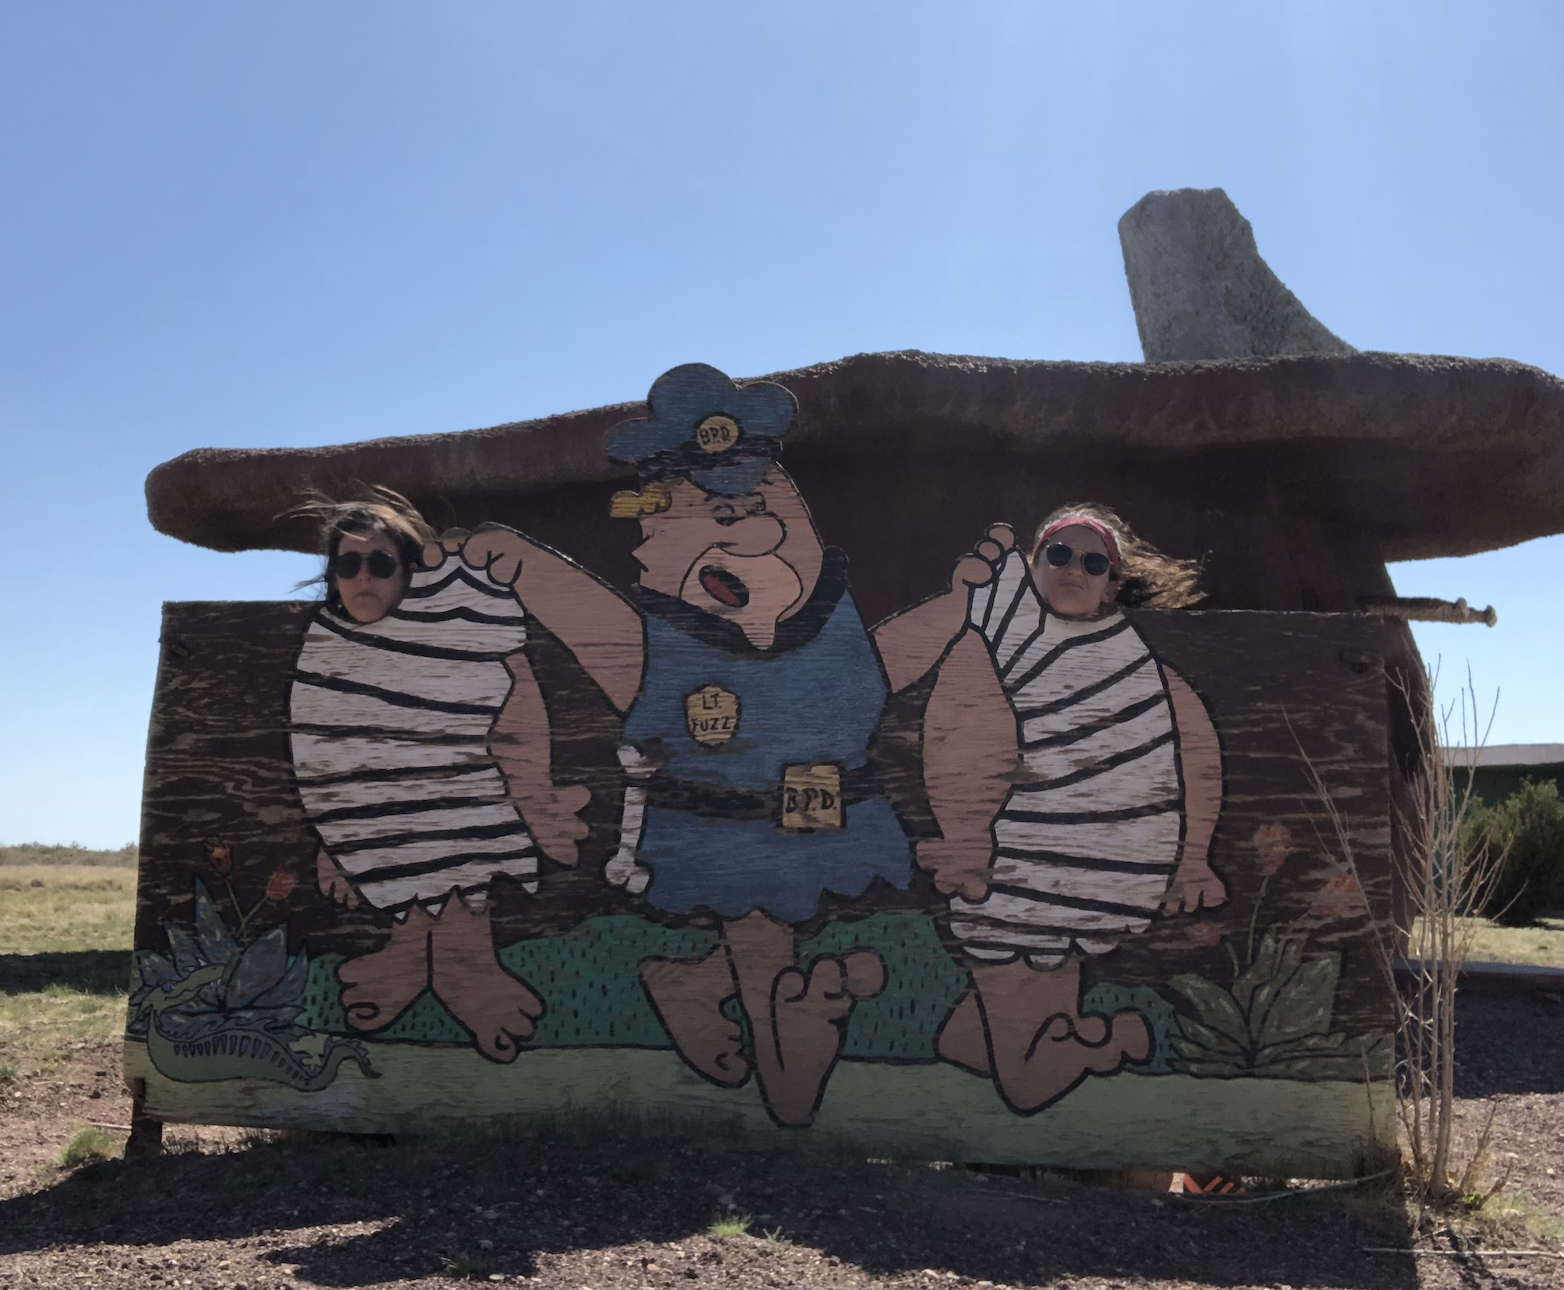 Posing for a photo in Bedrock City